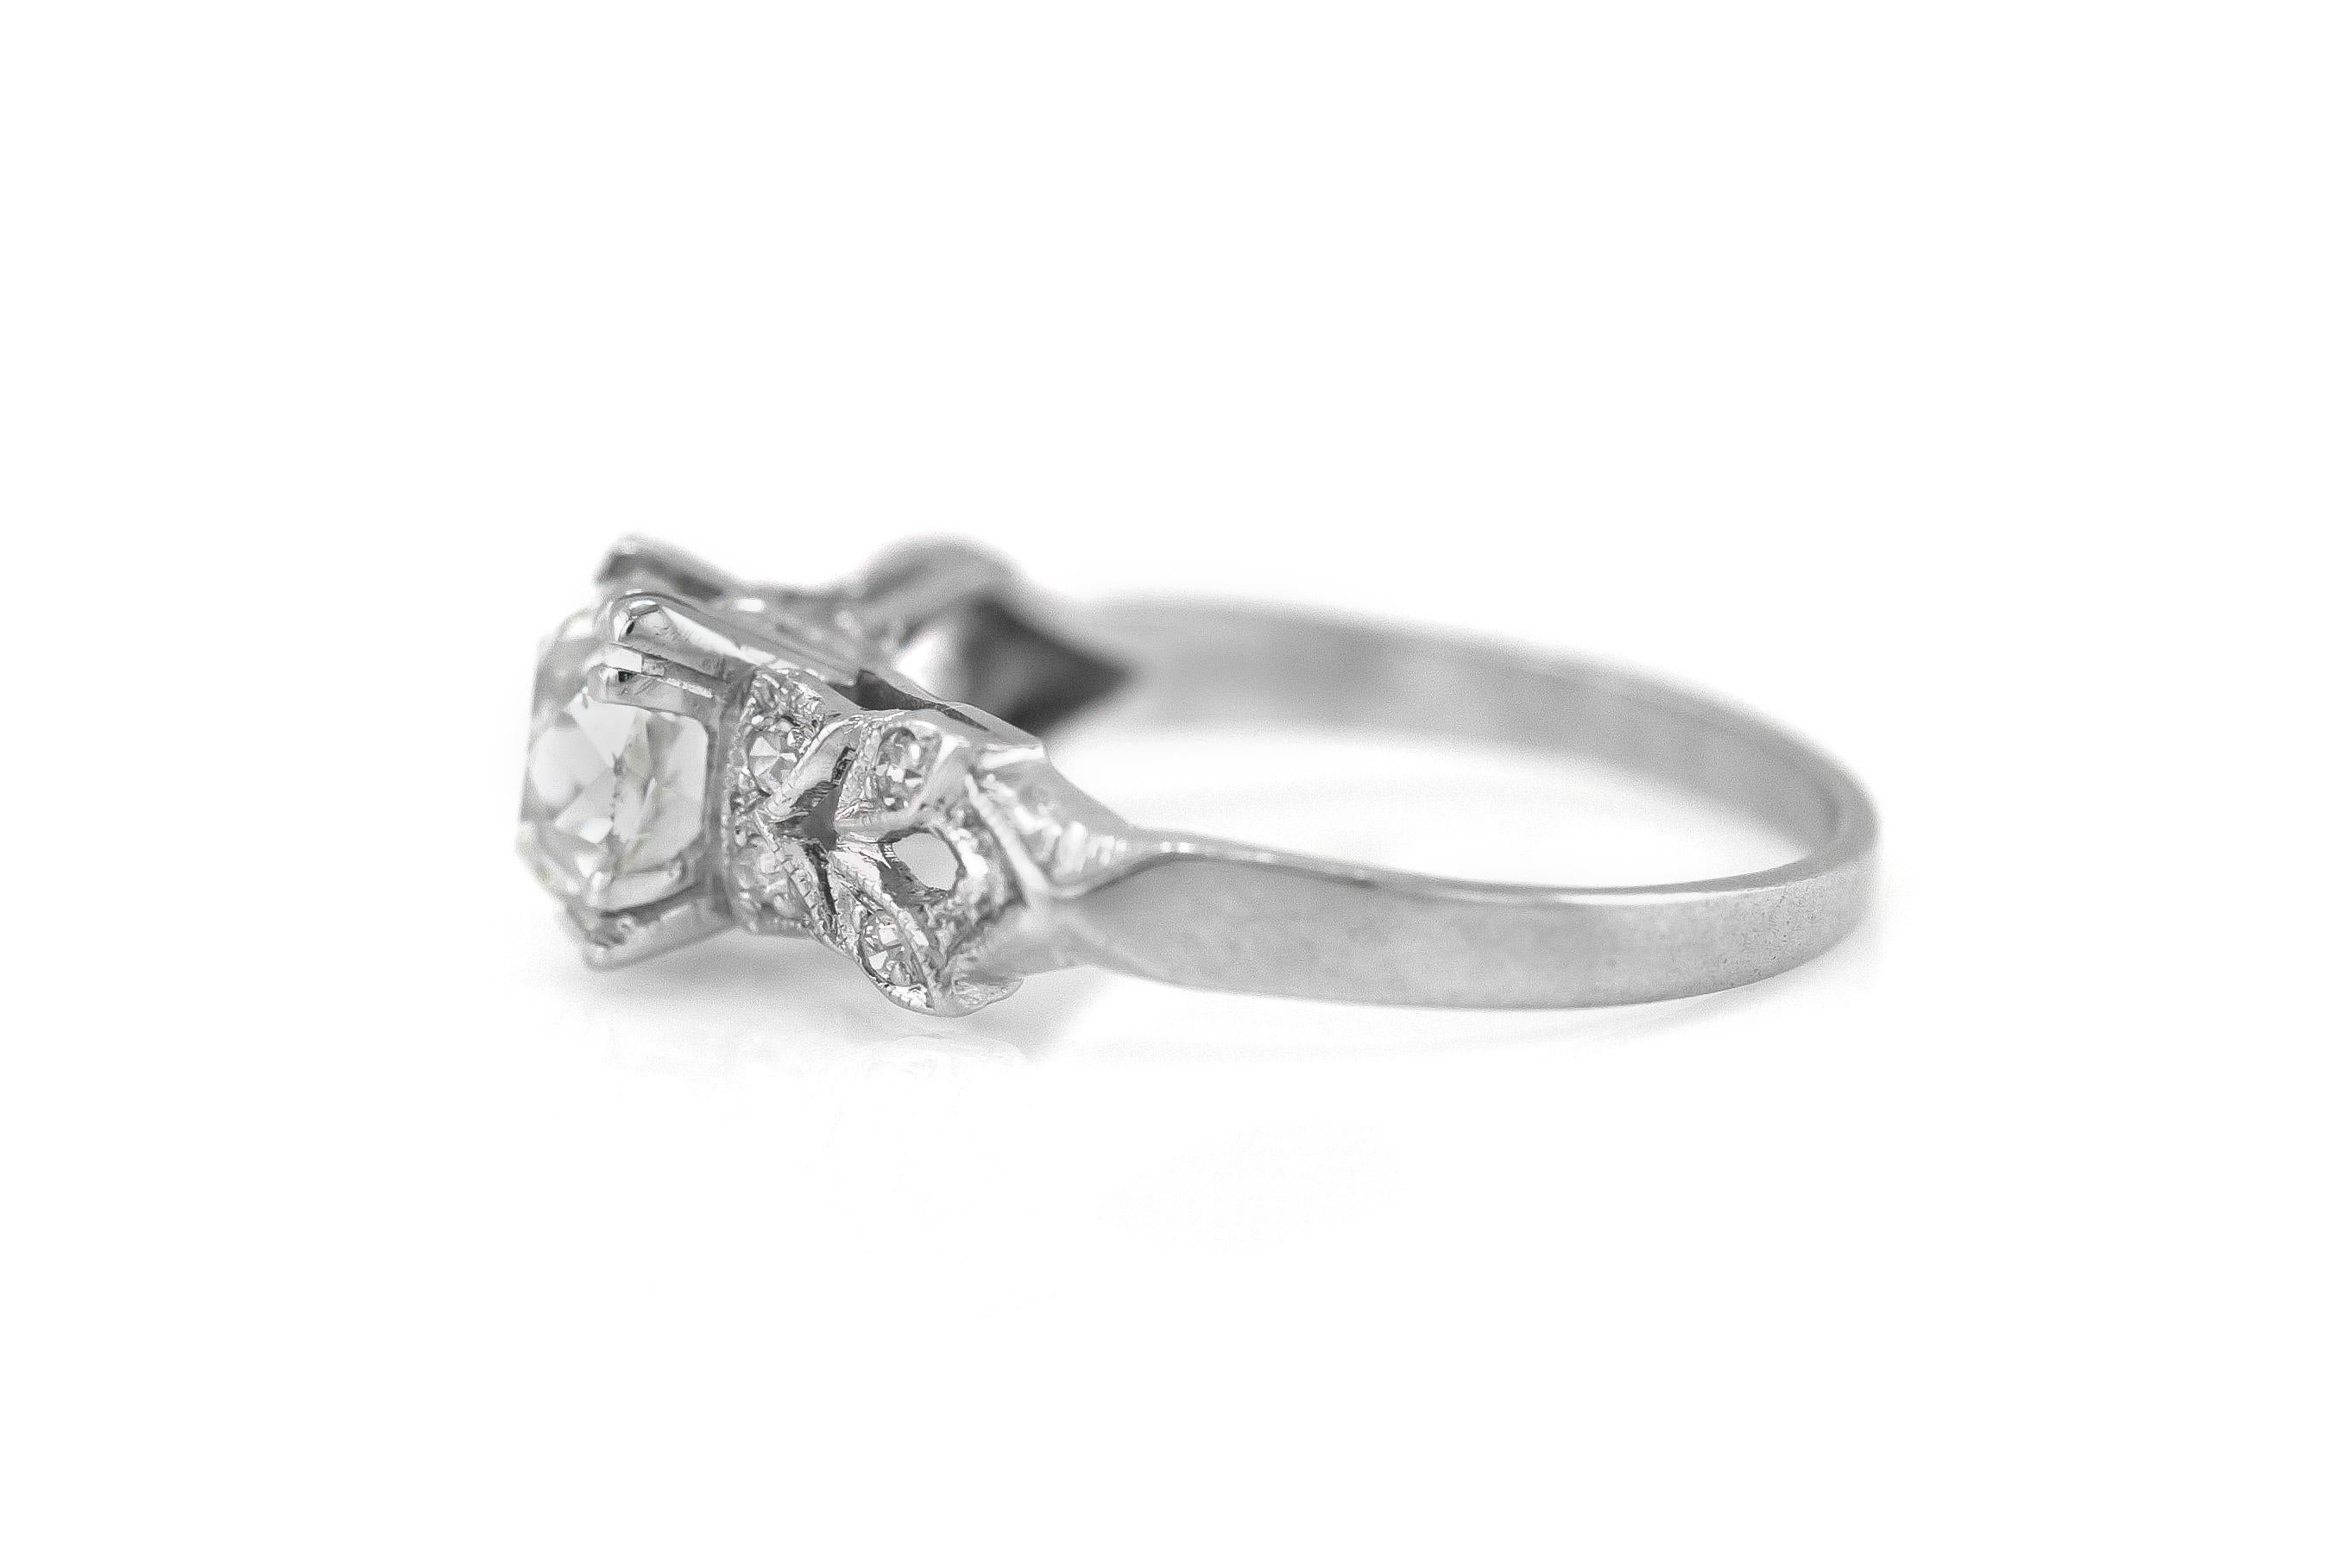 1.17 Carat Art Deco Diamond Ring In Good Condition For Sale In New York, NY